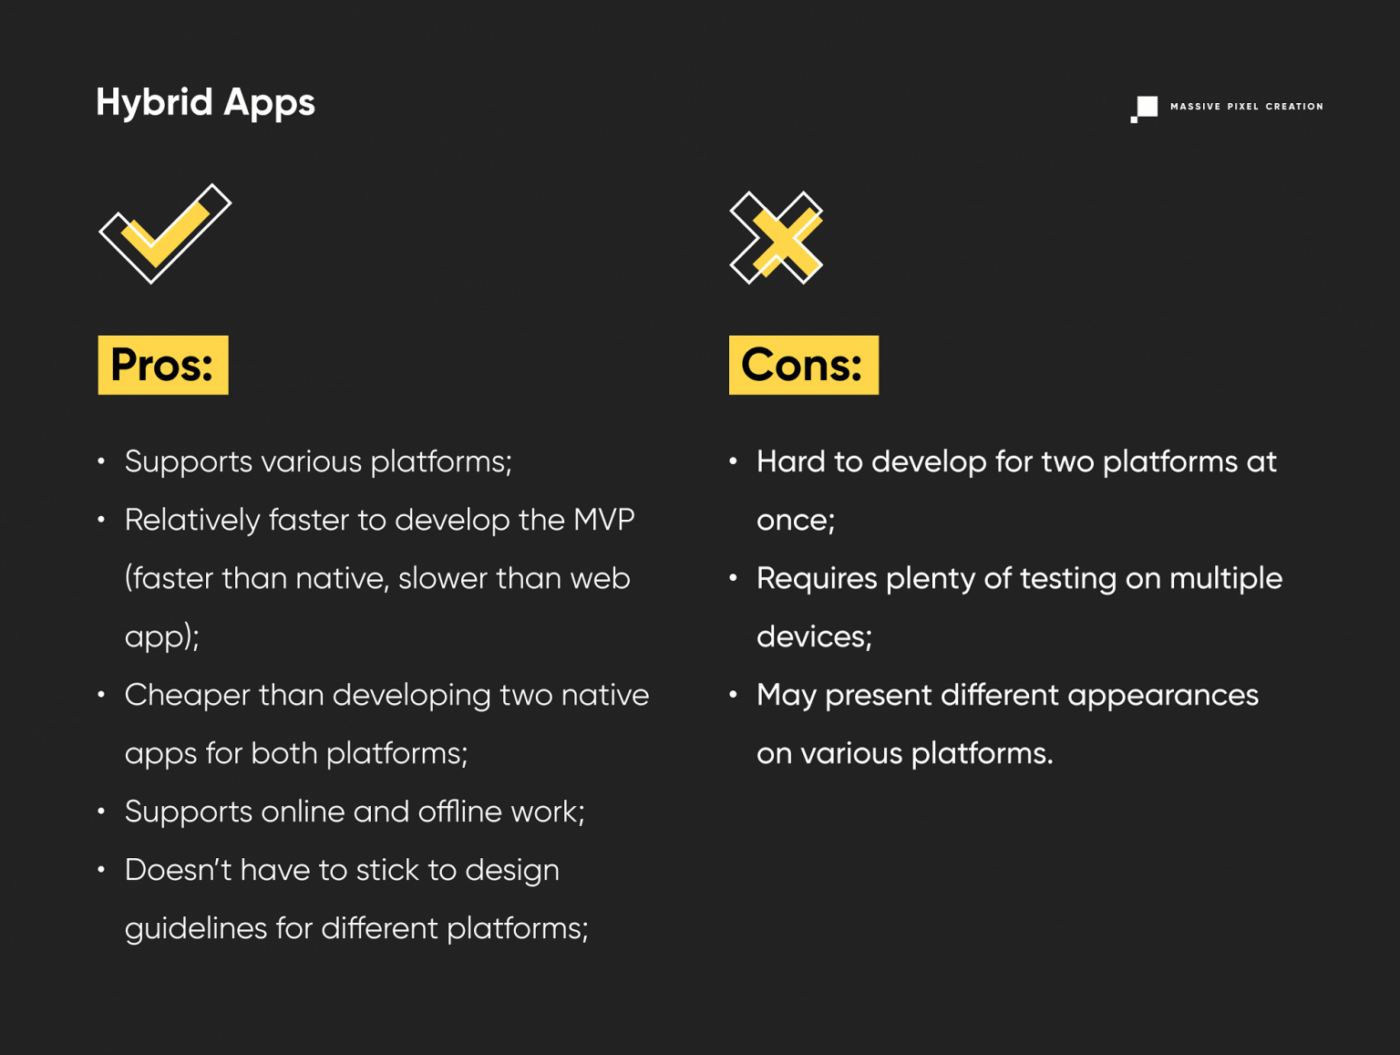 hybrid apps pros and cons